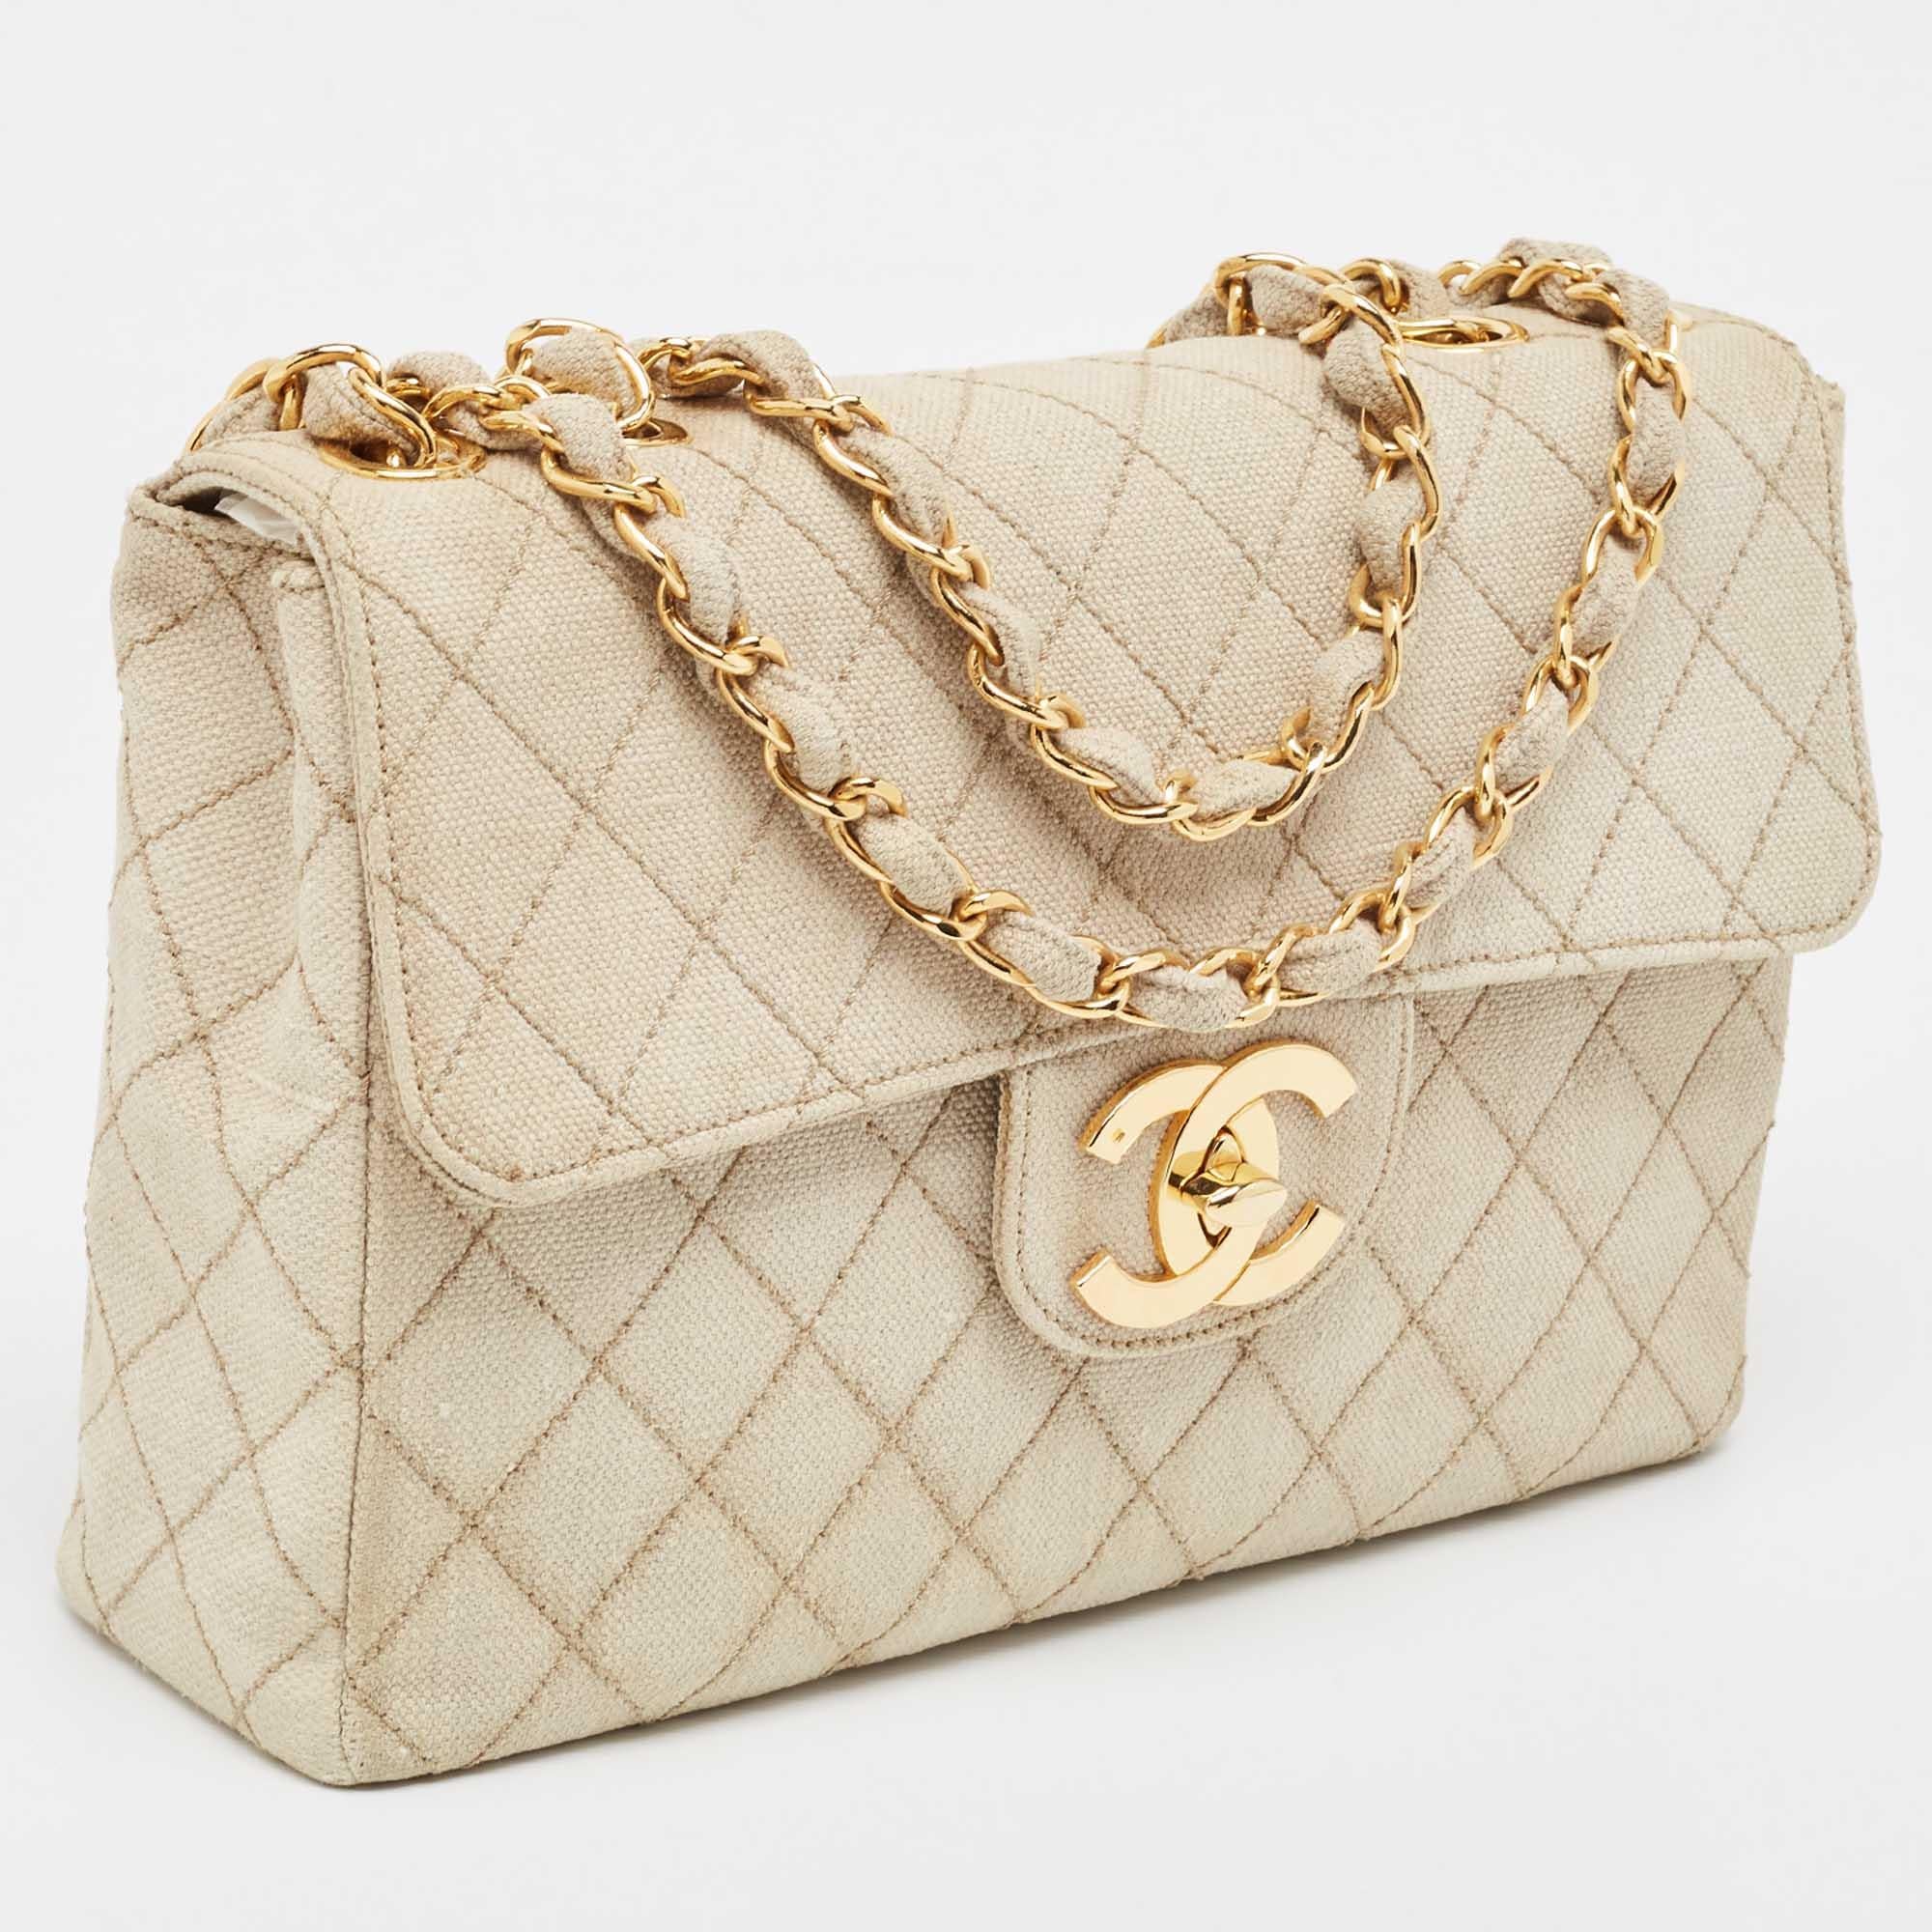 Reimagined season after season, the classic designs from Chanel manages to retain their classic glamour and noteworthy silhouettes. From one of the most celebrated collections, this Single Flap bag is enriched with historic details and functional